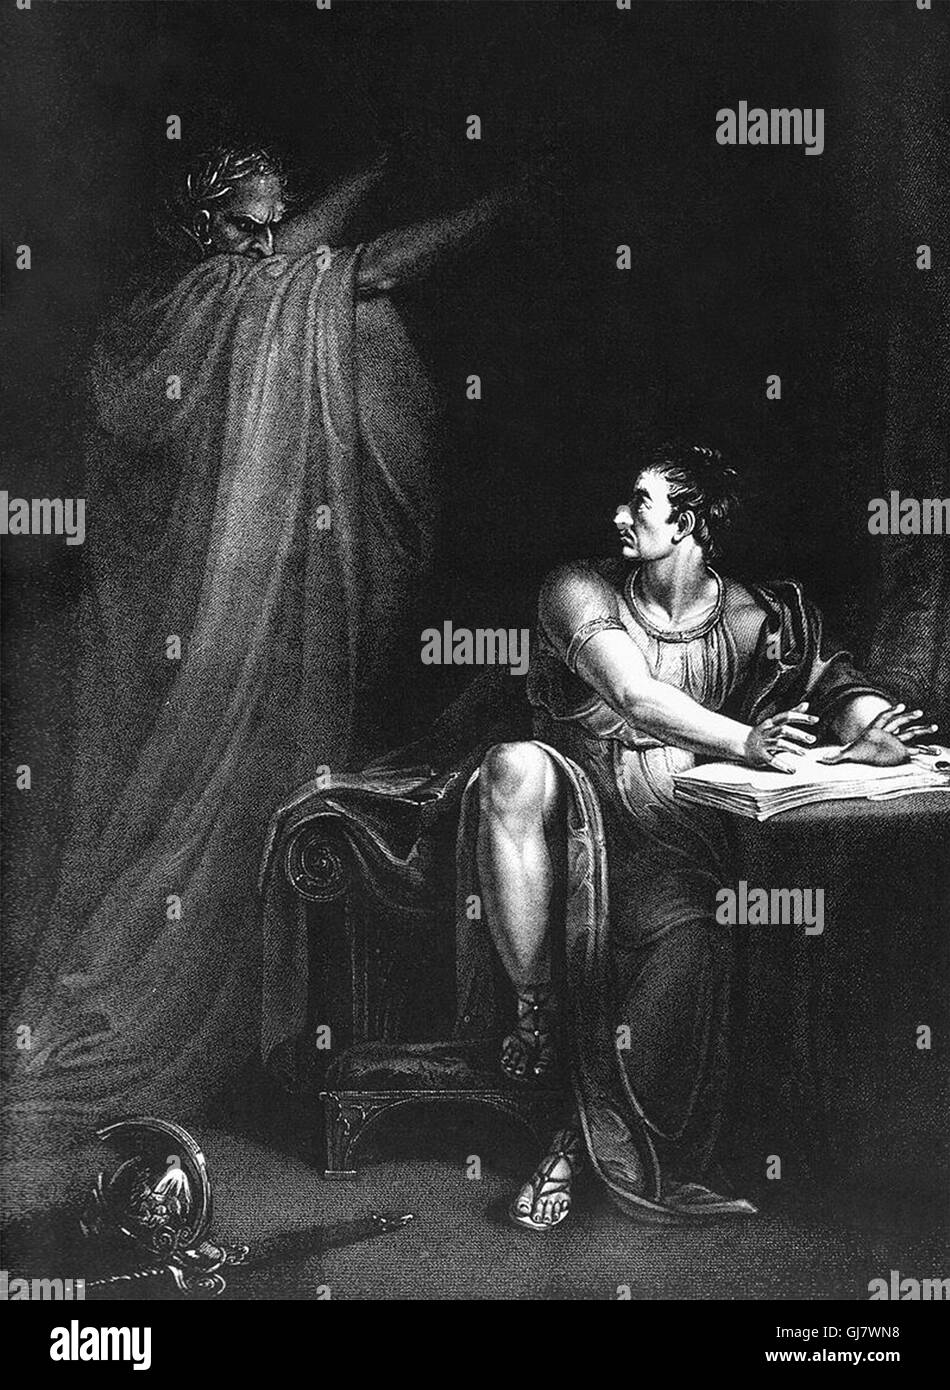 Brutus and the Ghost of Caesar (1802), copperplate engraving by Edward Scriven from a painting by Richard Westall, illustrating Act IV, Scene III, from Shakespeare's Julius Caesar.  Caesar was assassinated on the Ides of March (15 March) 44 BC. The assassination of Julius Caesar was the result of a conspiracy by many Roman senators. Led by Gaius Cassius Longinus and Marcus Junius Brutus, they stabbed Julius Caesar to death in a location adjacent to the Theatre of Pompey on the Ides of March. Stock Photo